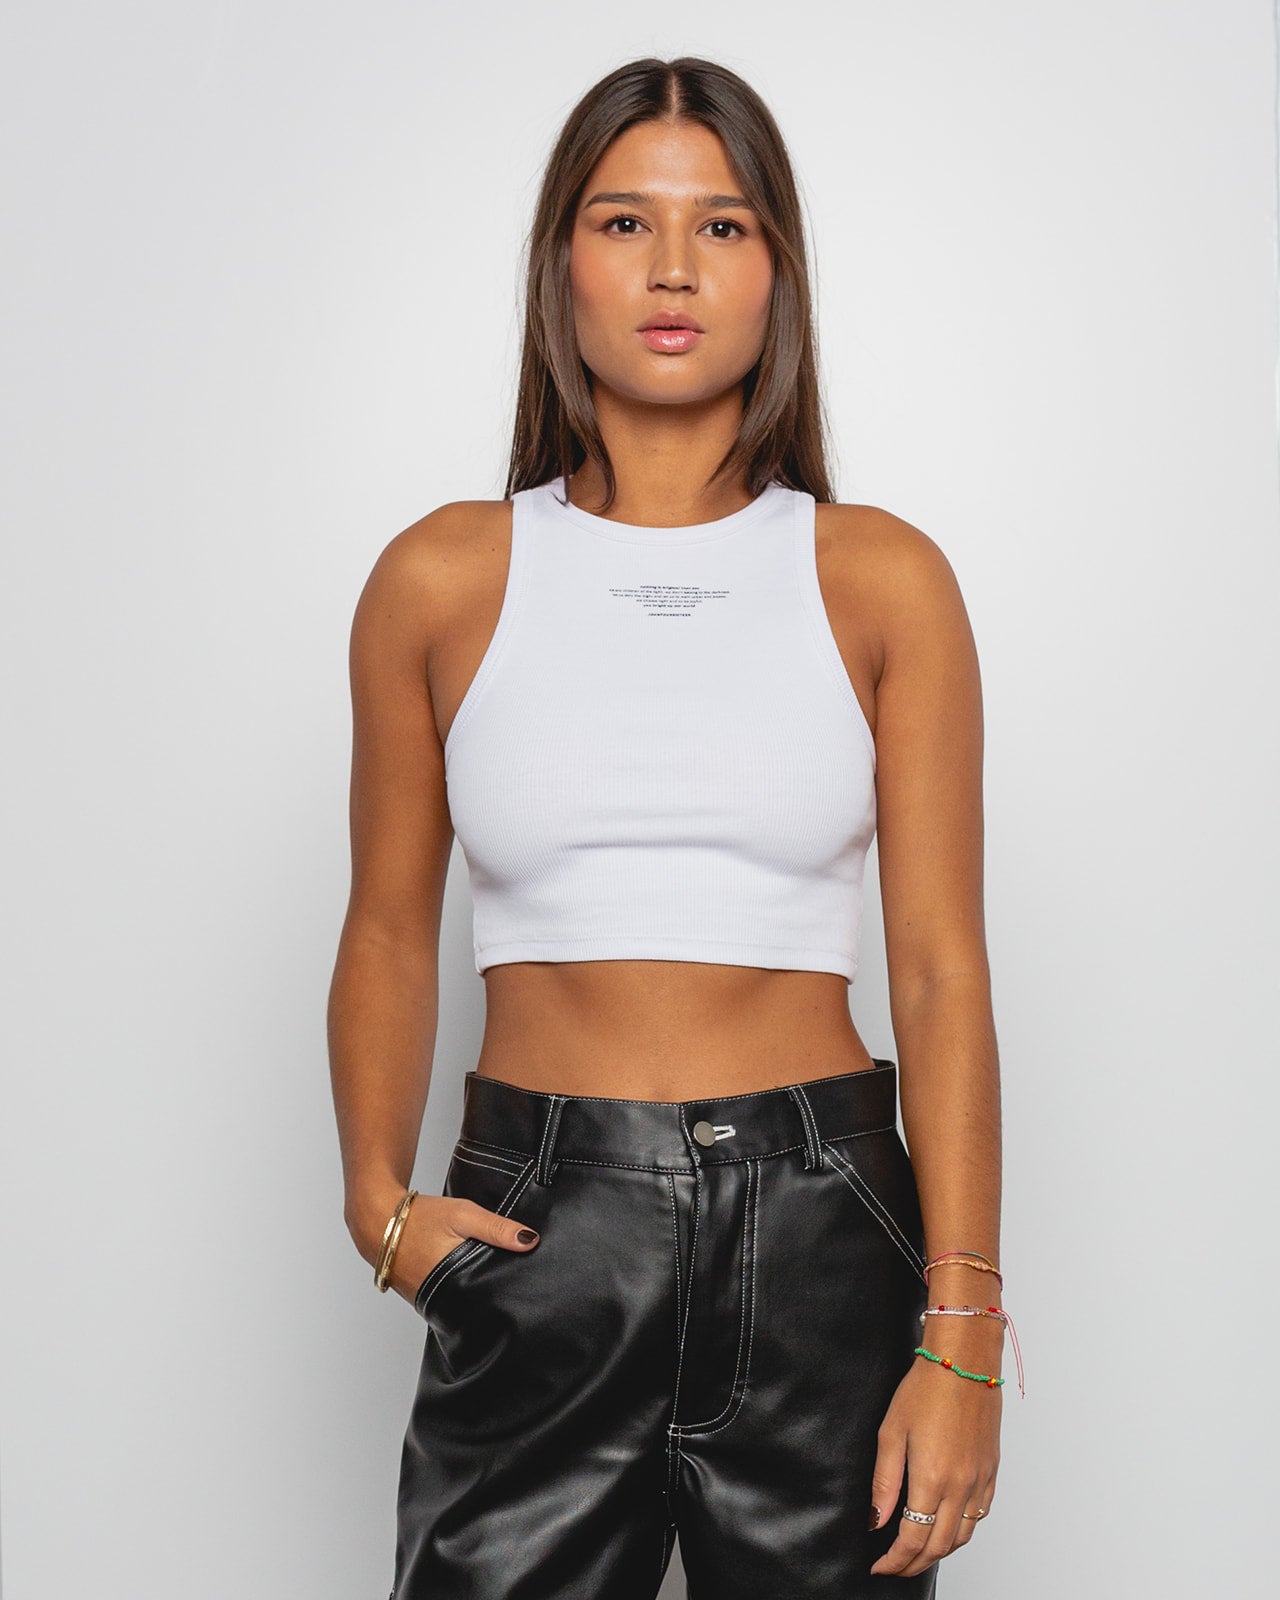 S&A Top cropped white